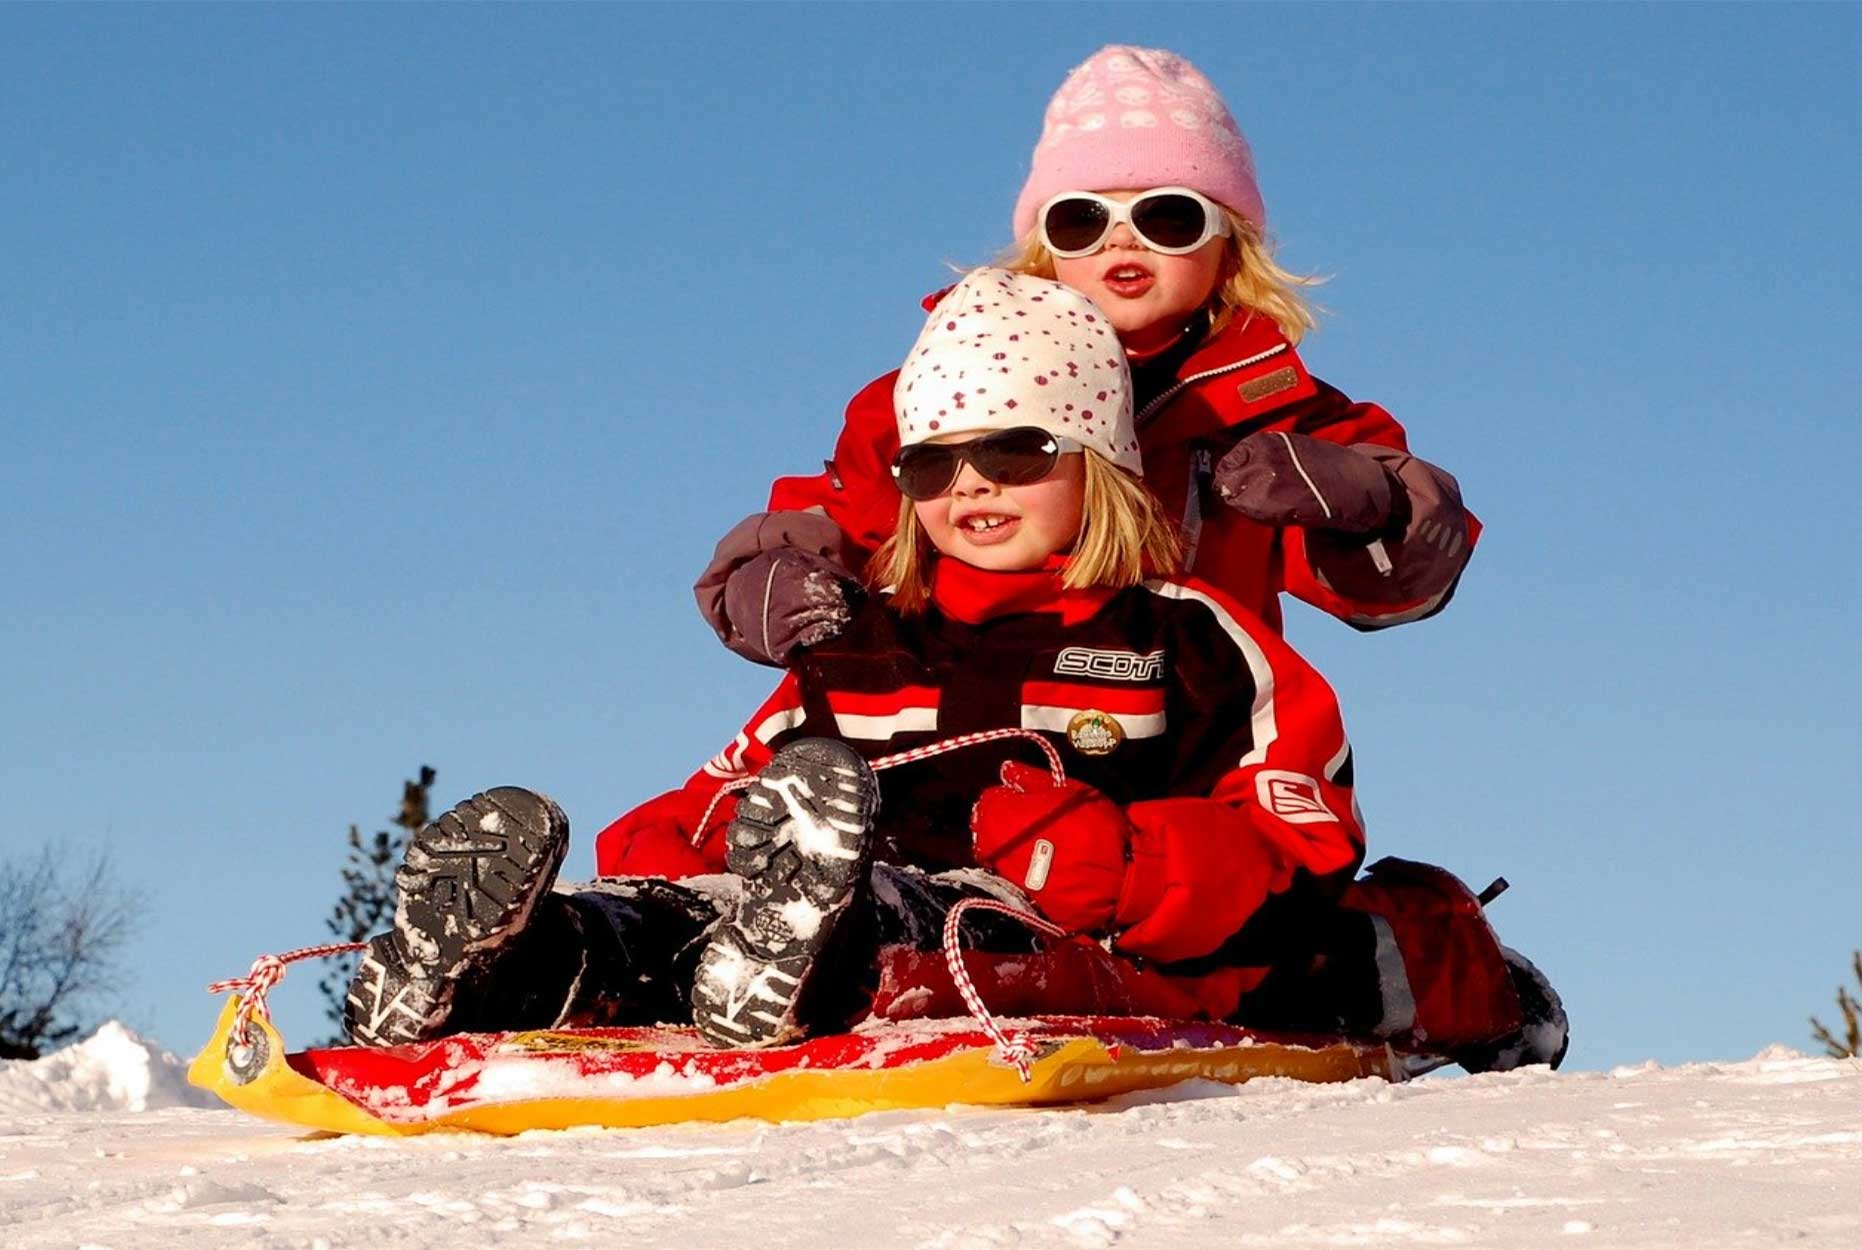 Two young girls in winter clothing riding on a sled.